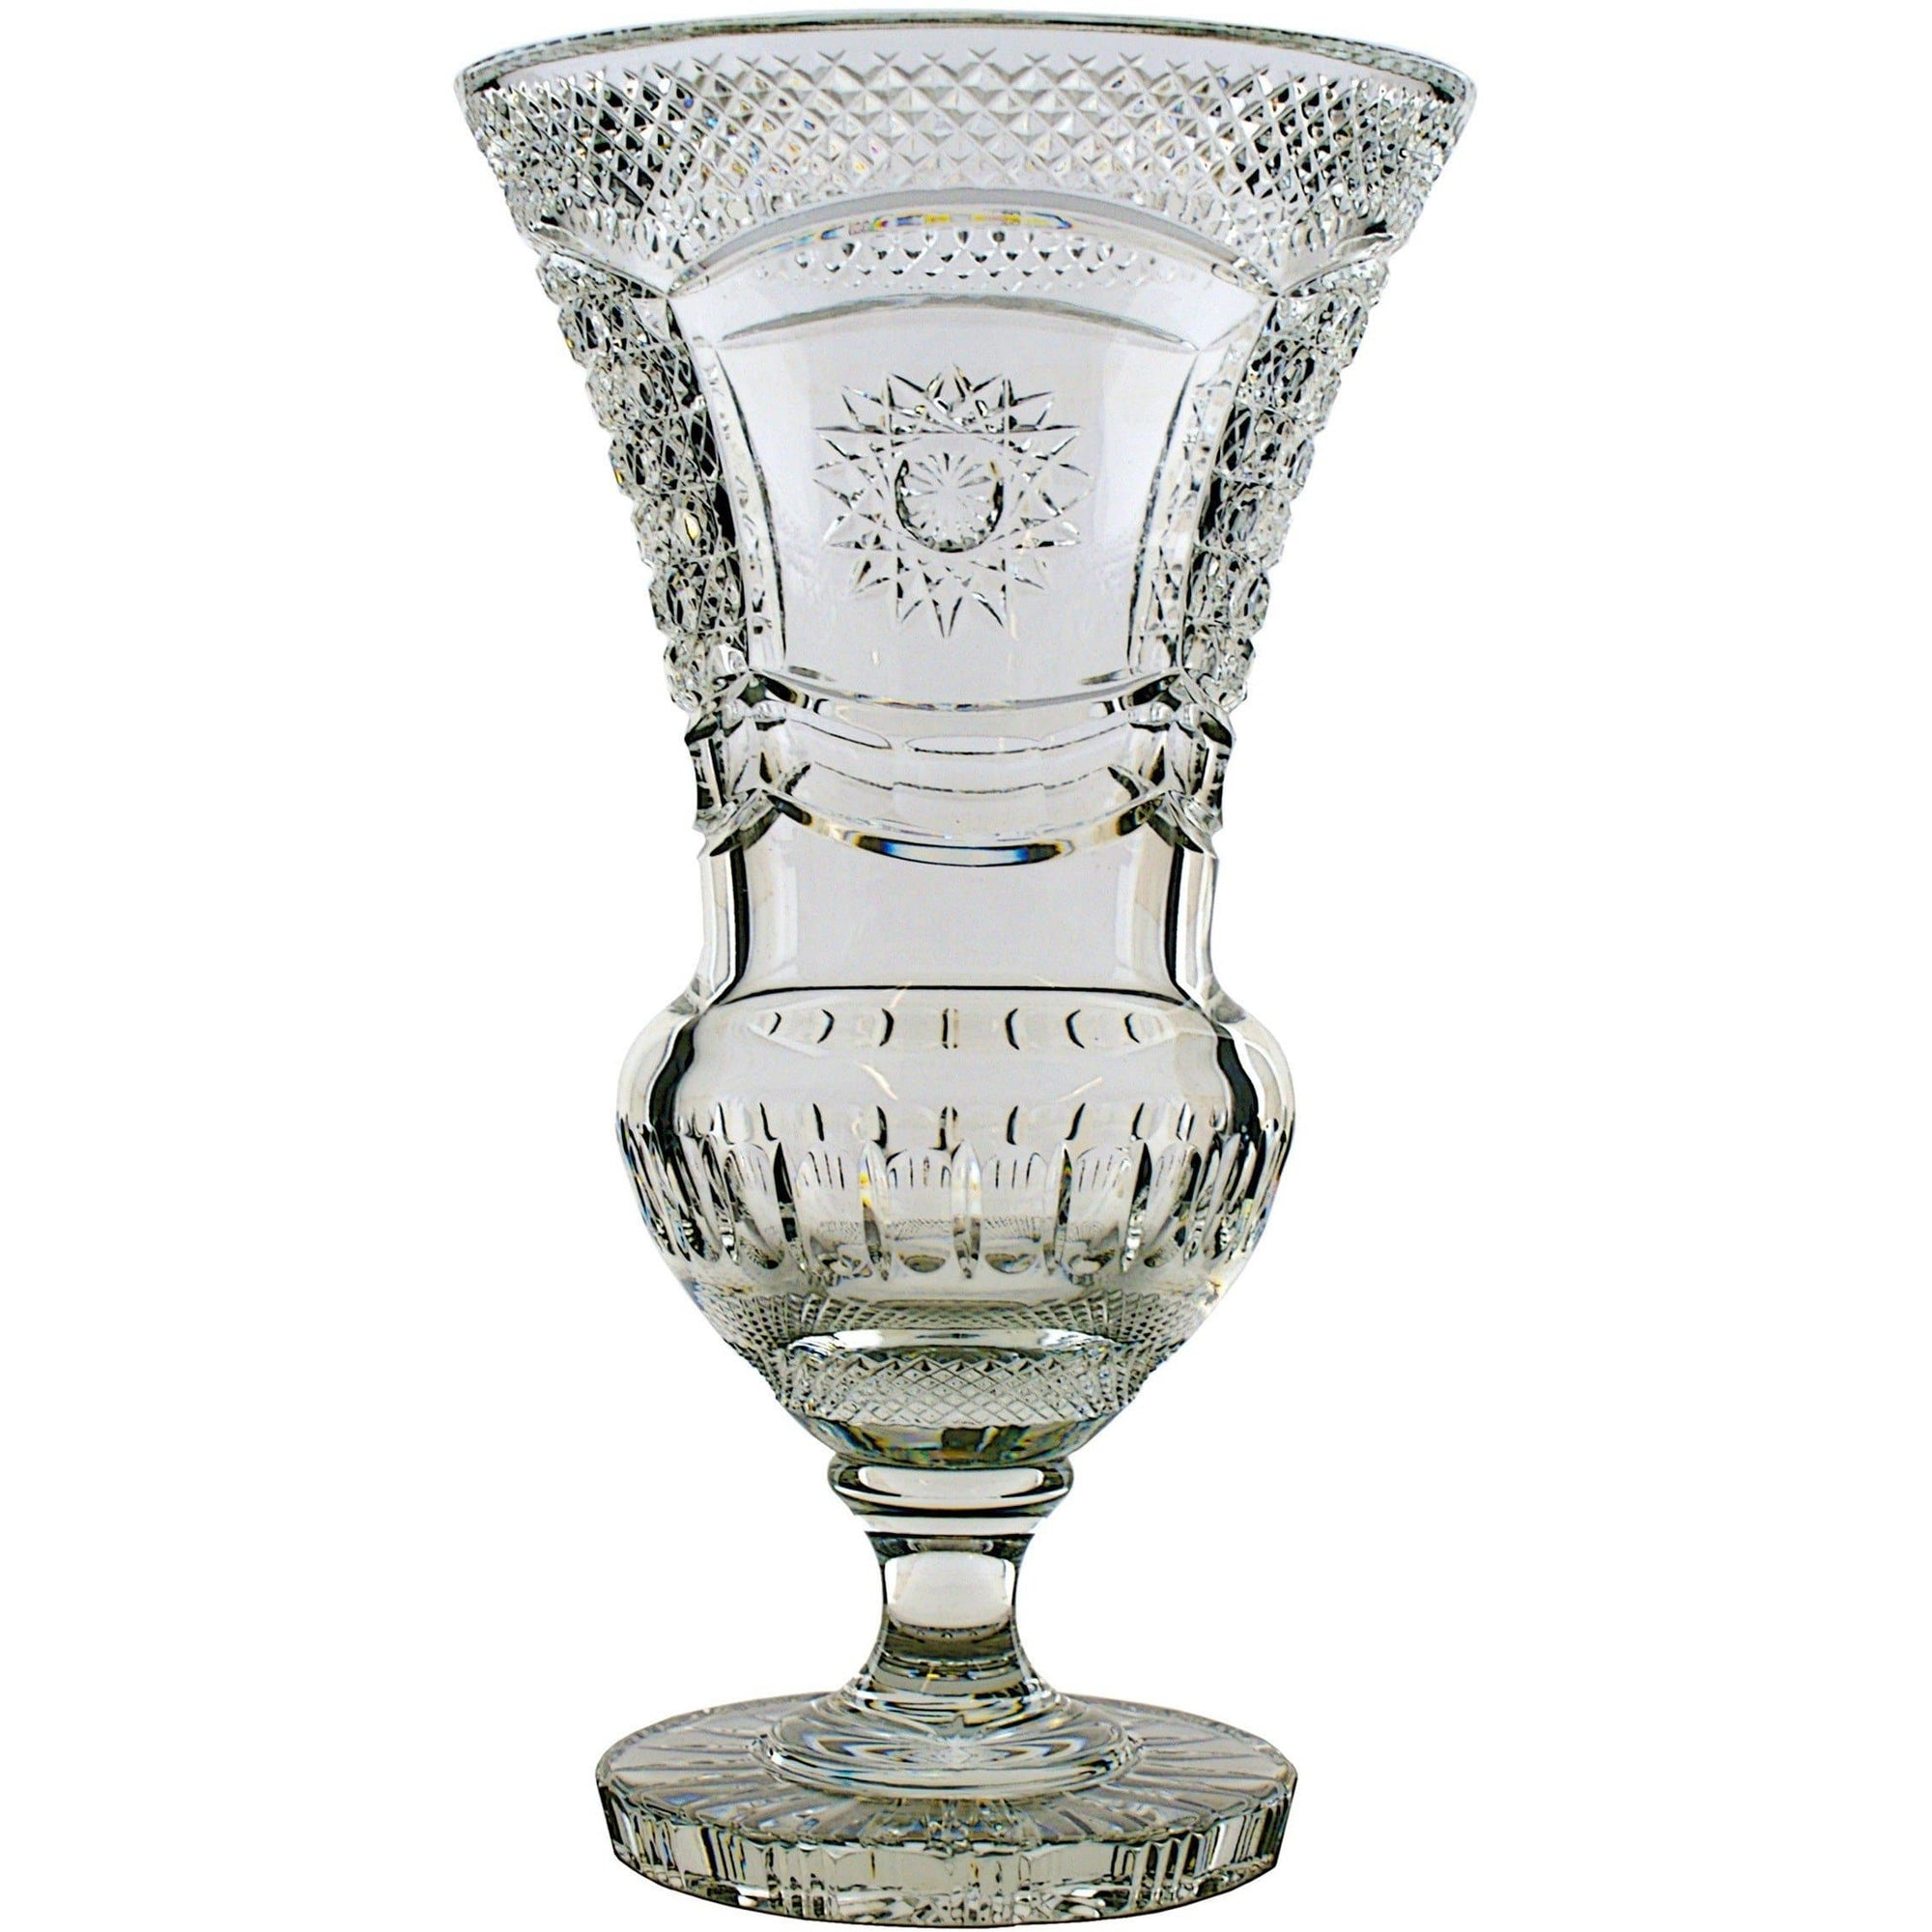 Engraved 12" Footed Centre Piece - Galway Irish Crystal